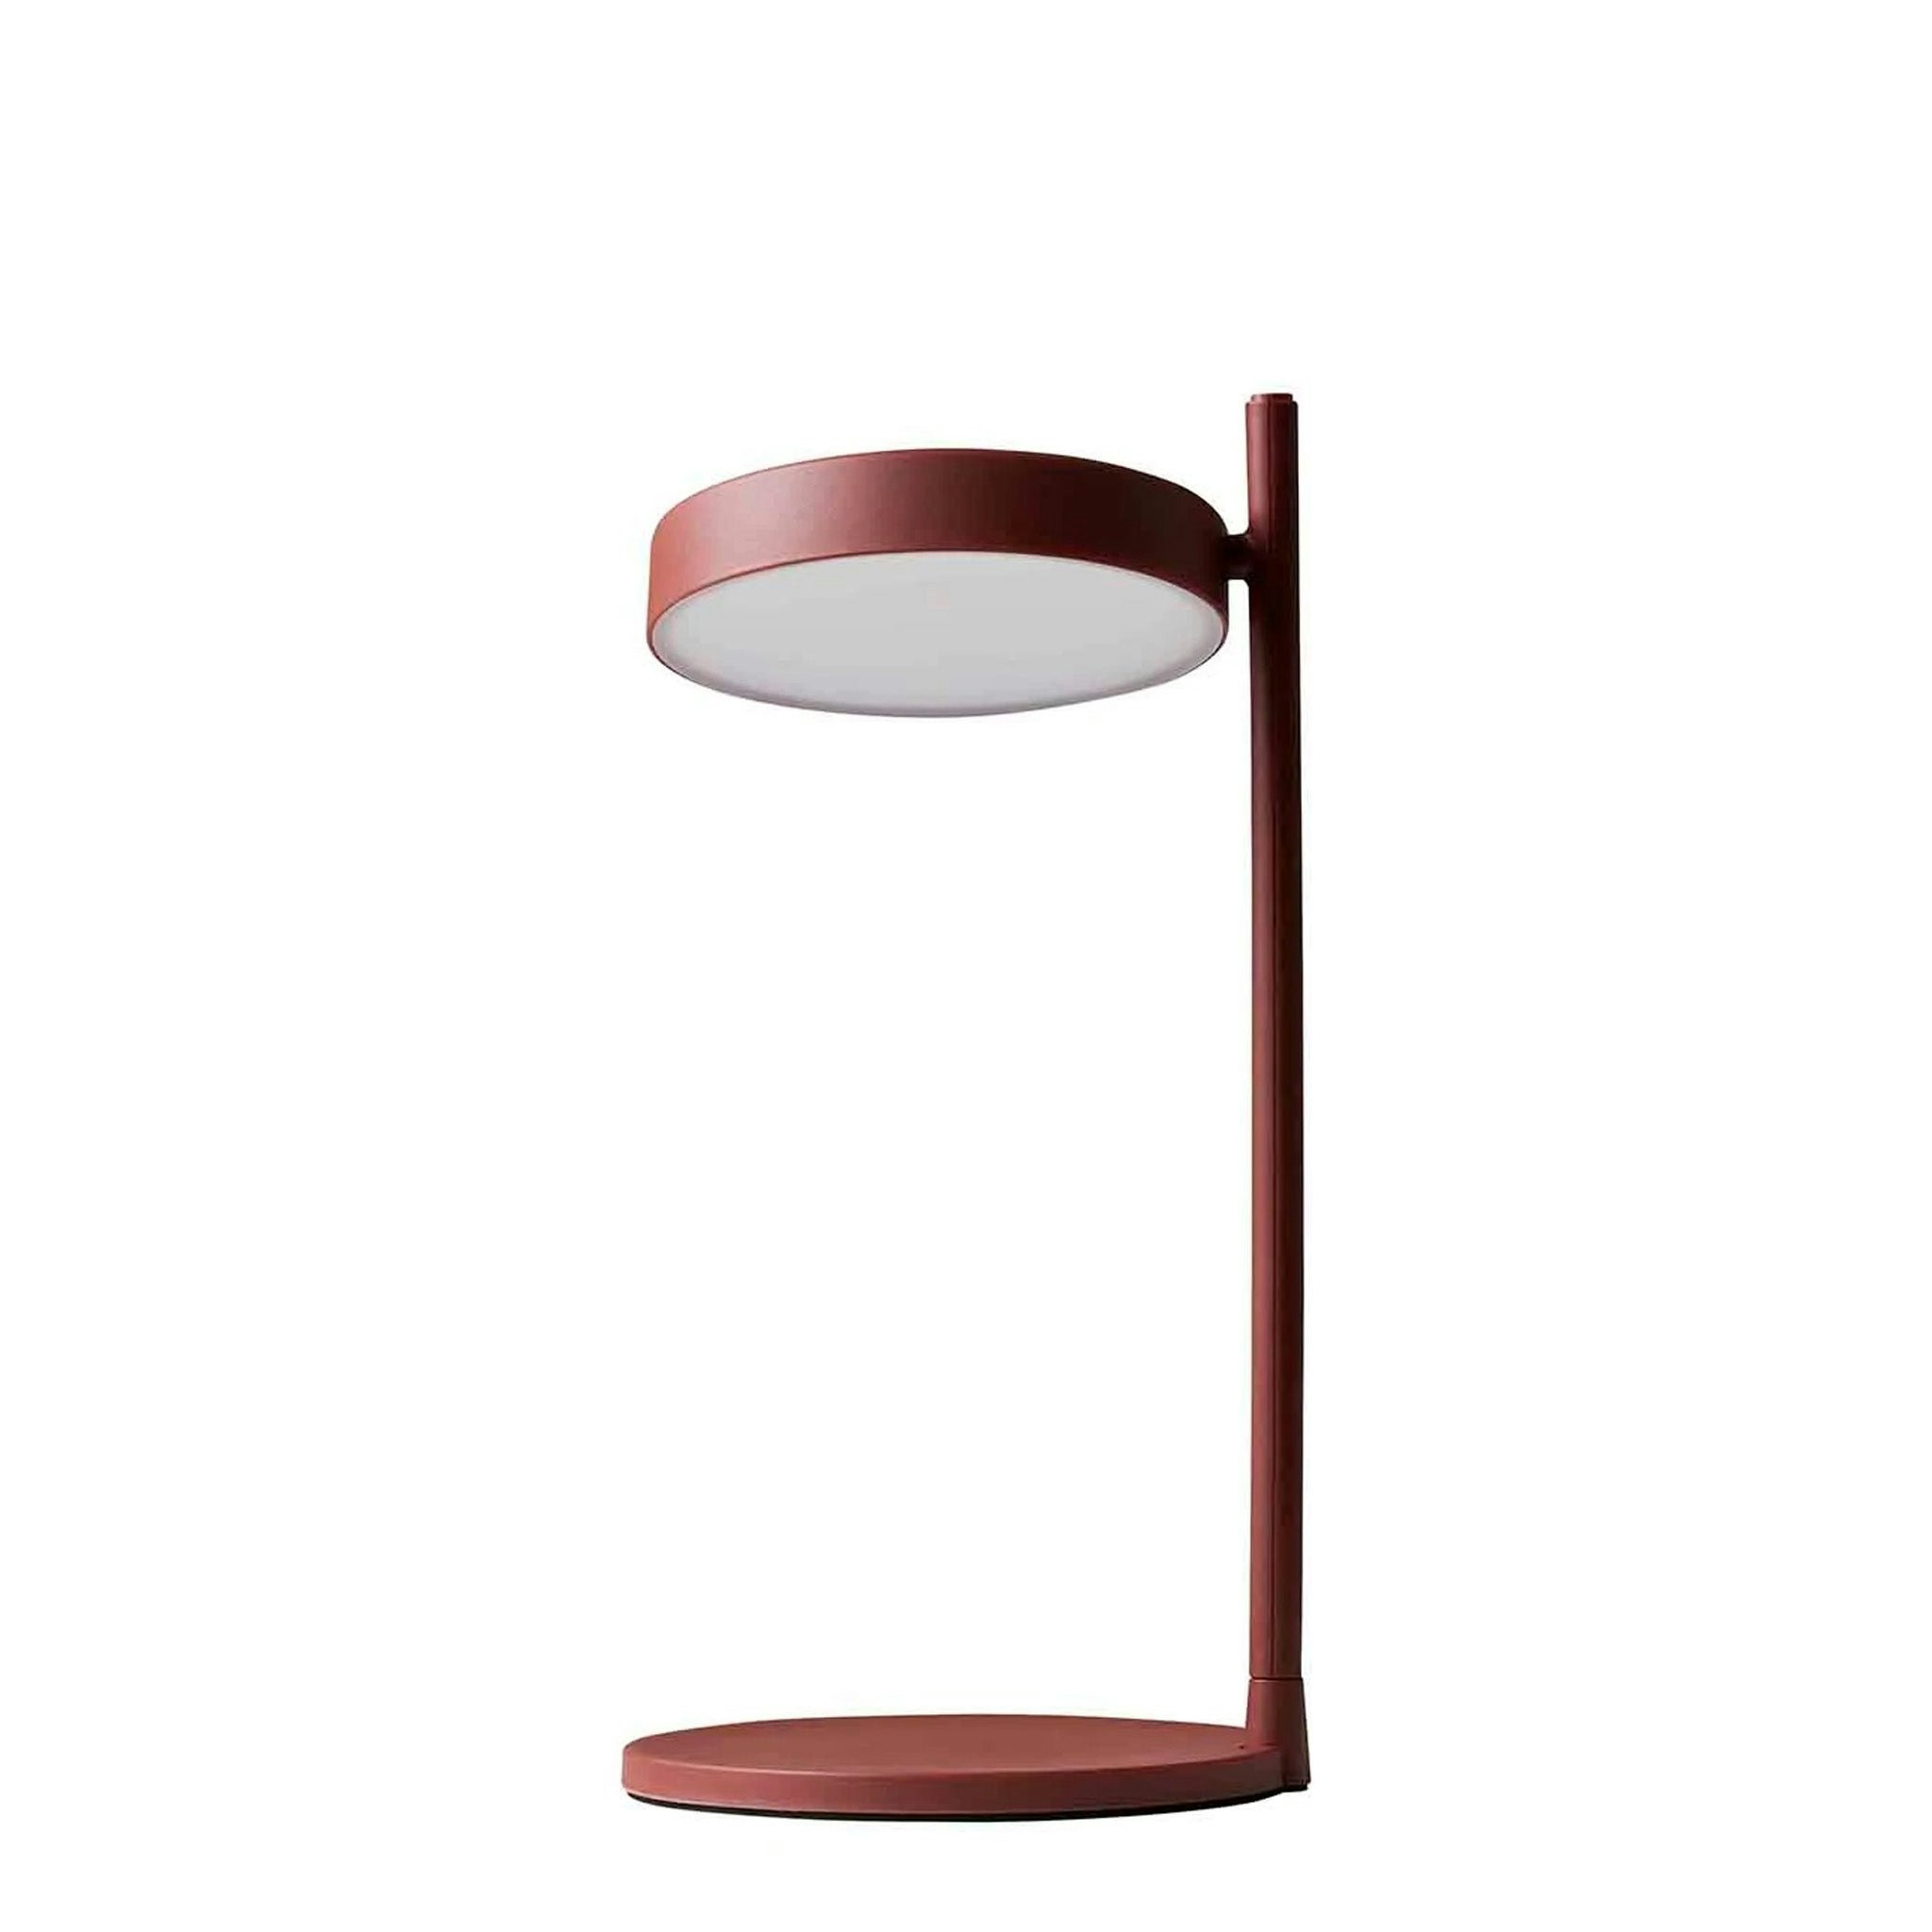 w182 Pastille Table Lamp by Wastberg